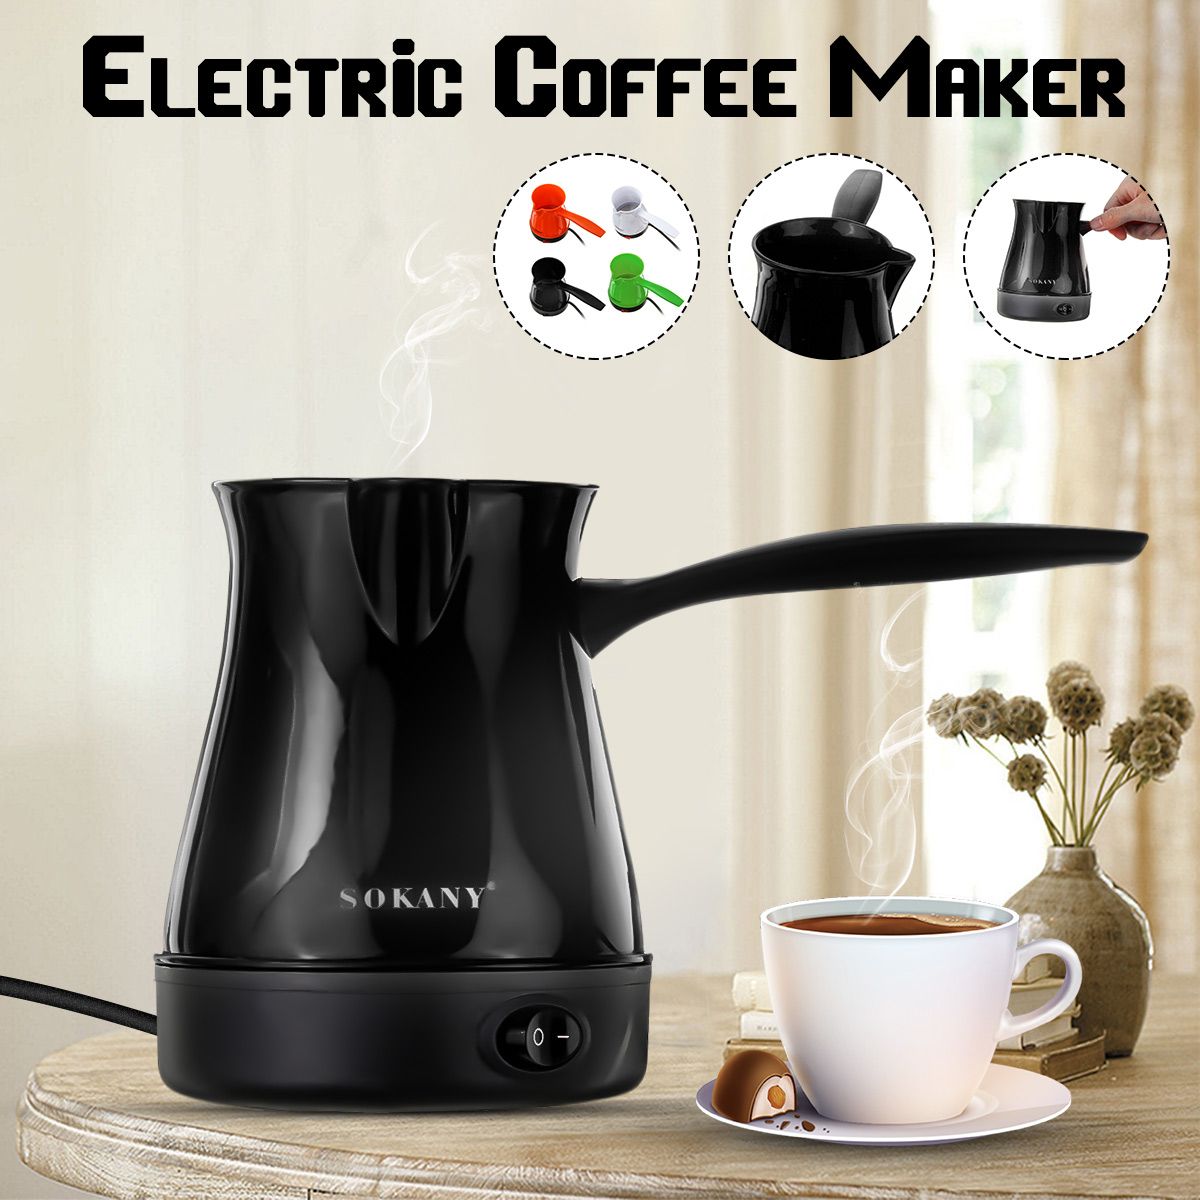 220V-Electric-Turkish-Greek-ABS-and-Stainless-Steel-Portable-Coffee-Maker-Machine-Cezve-Pot-1481738